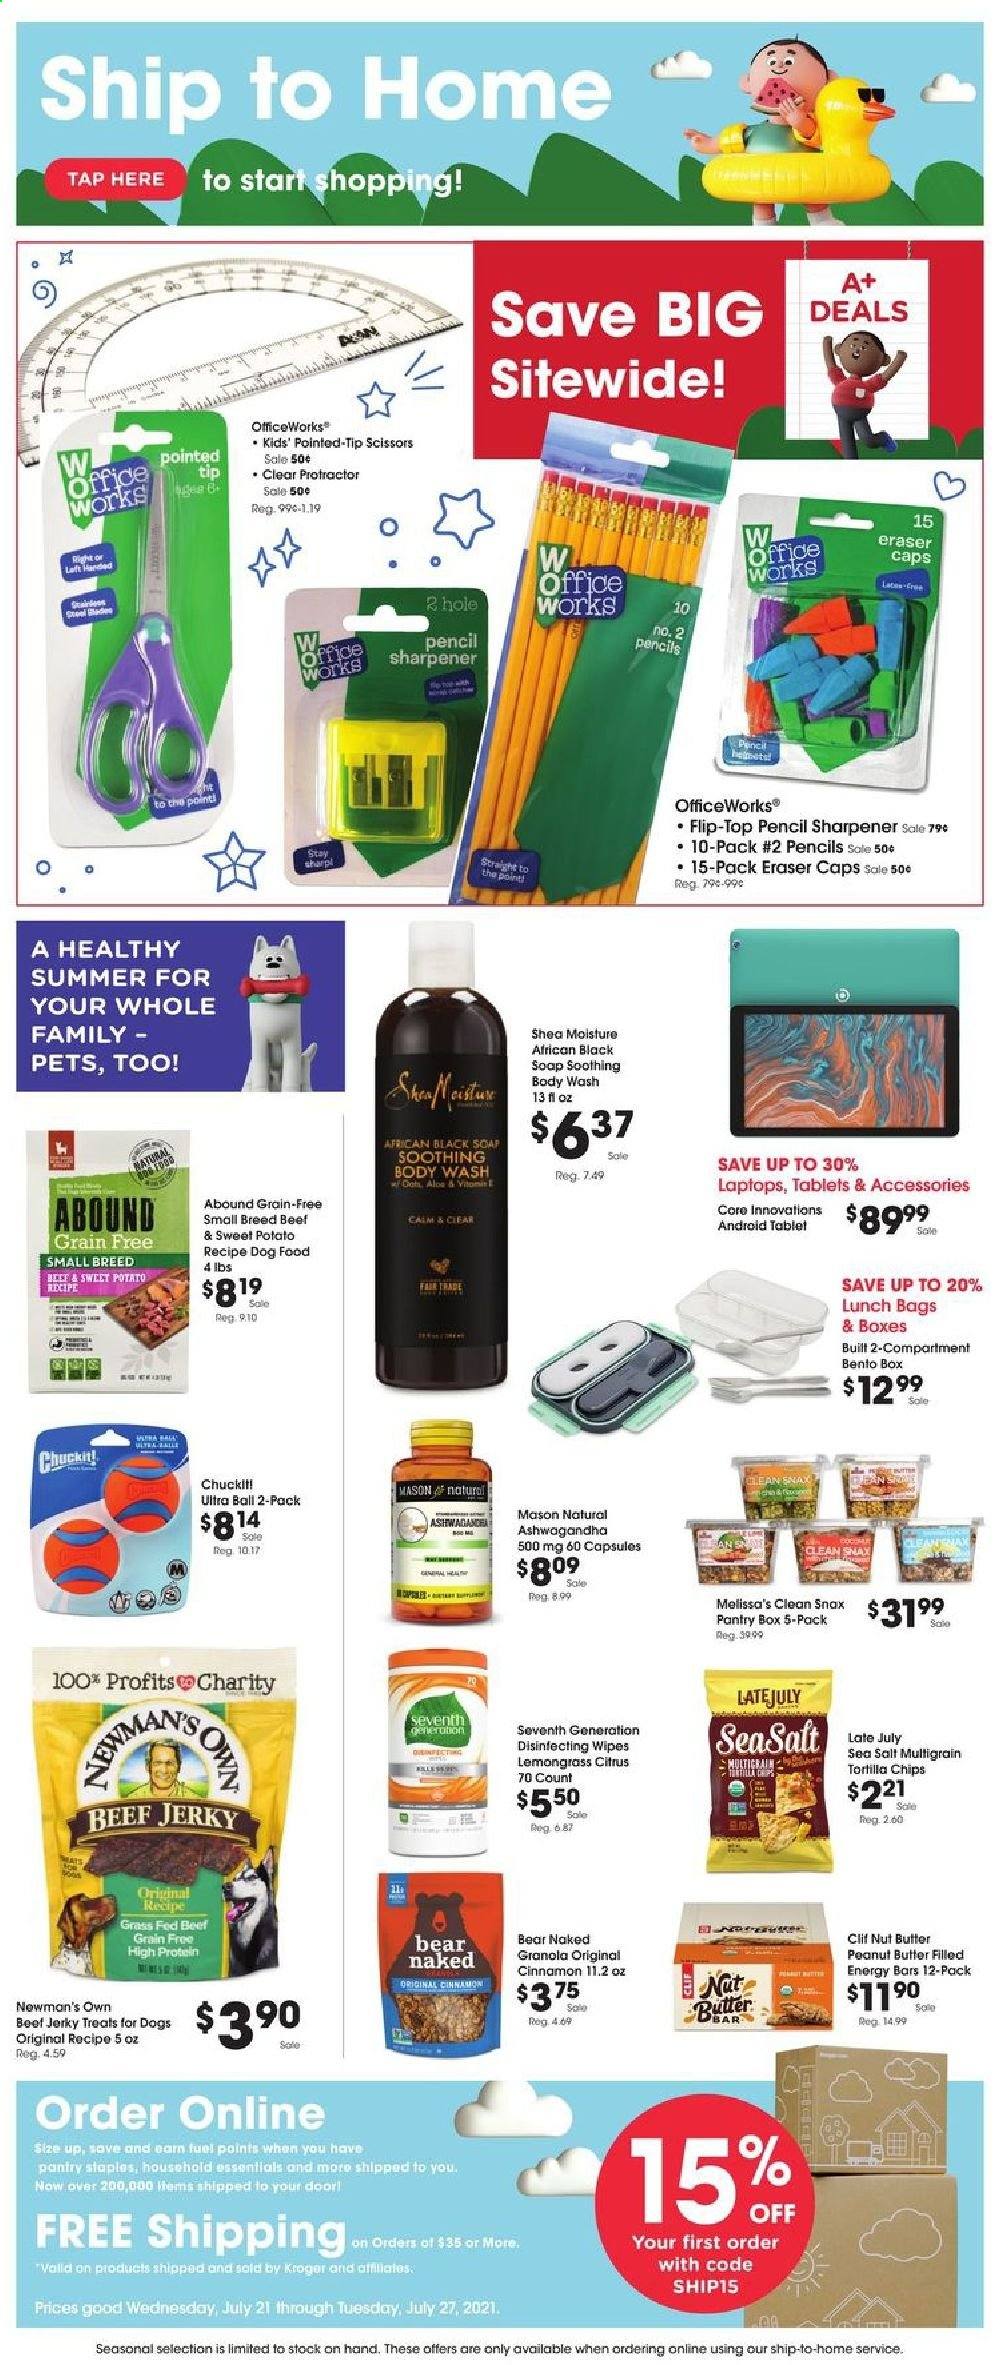 thumbnail - Dillons Flyer - 07/21/2021 - 07/27/2021 - Sales products - sweet potato, beef jerky, jerky, tortilla chips, chips, granola, energy bar, cinnamon, peanut butter, nut butter, wipes, body wash, soap, meal box, sharpener, scissors, eraser, animal food, dog food. Page 1.